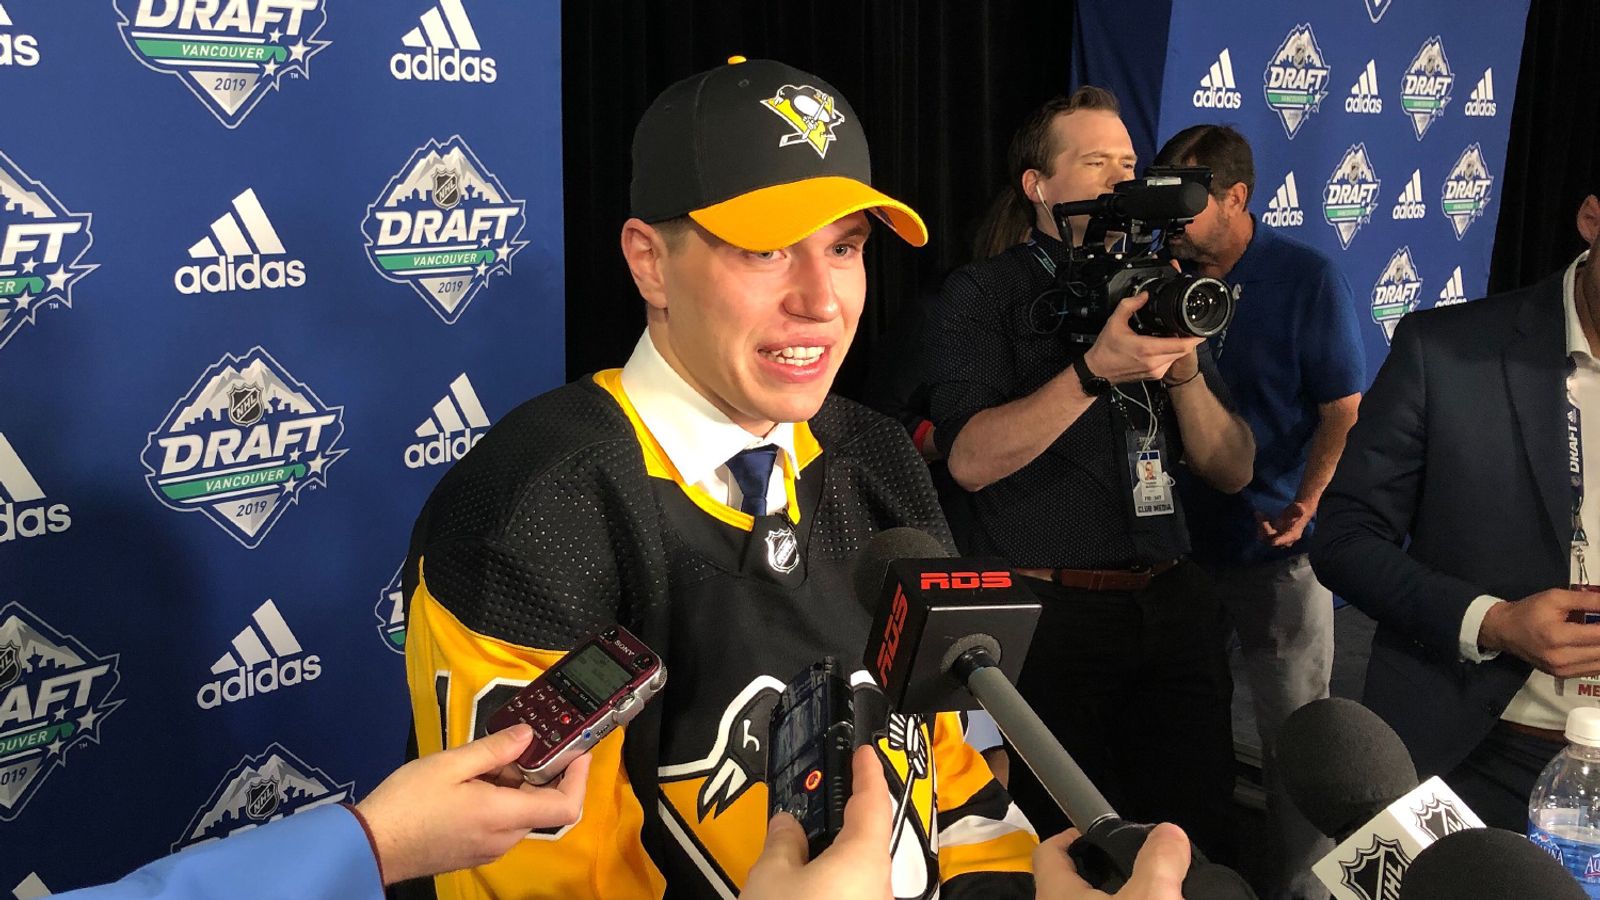 First-round pick Poulin powers way into Penguins' future ☕